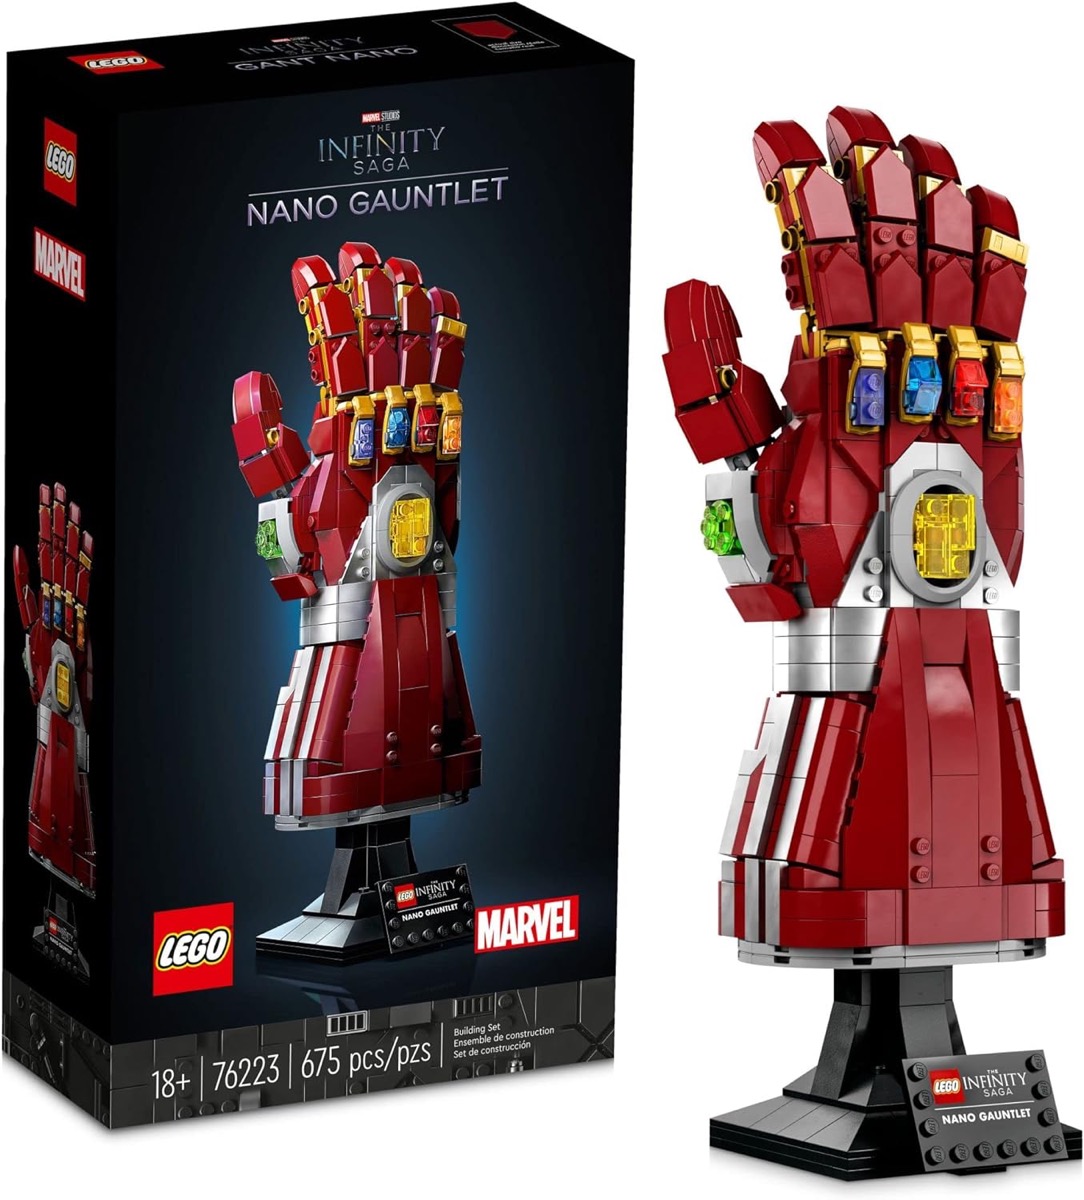 A LEGO version of the Infinity Gauntlet